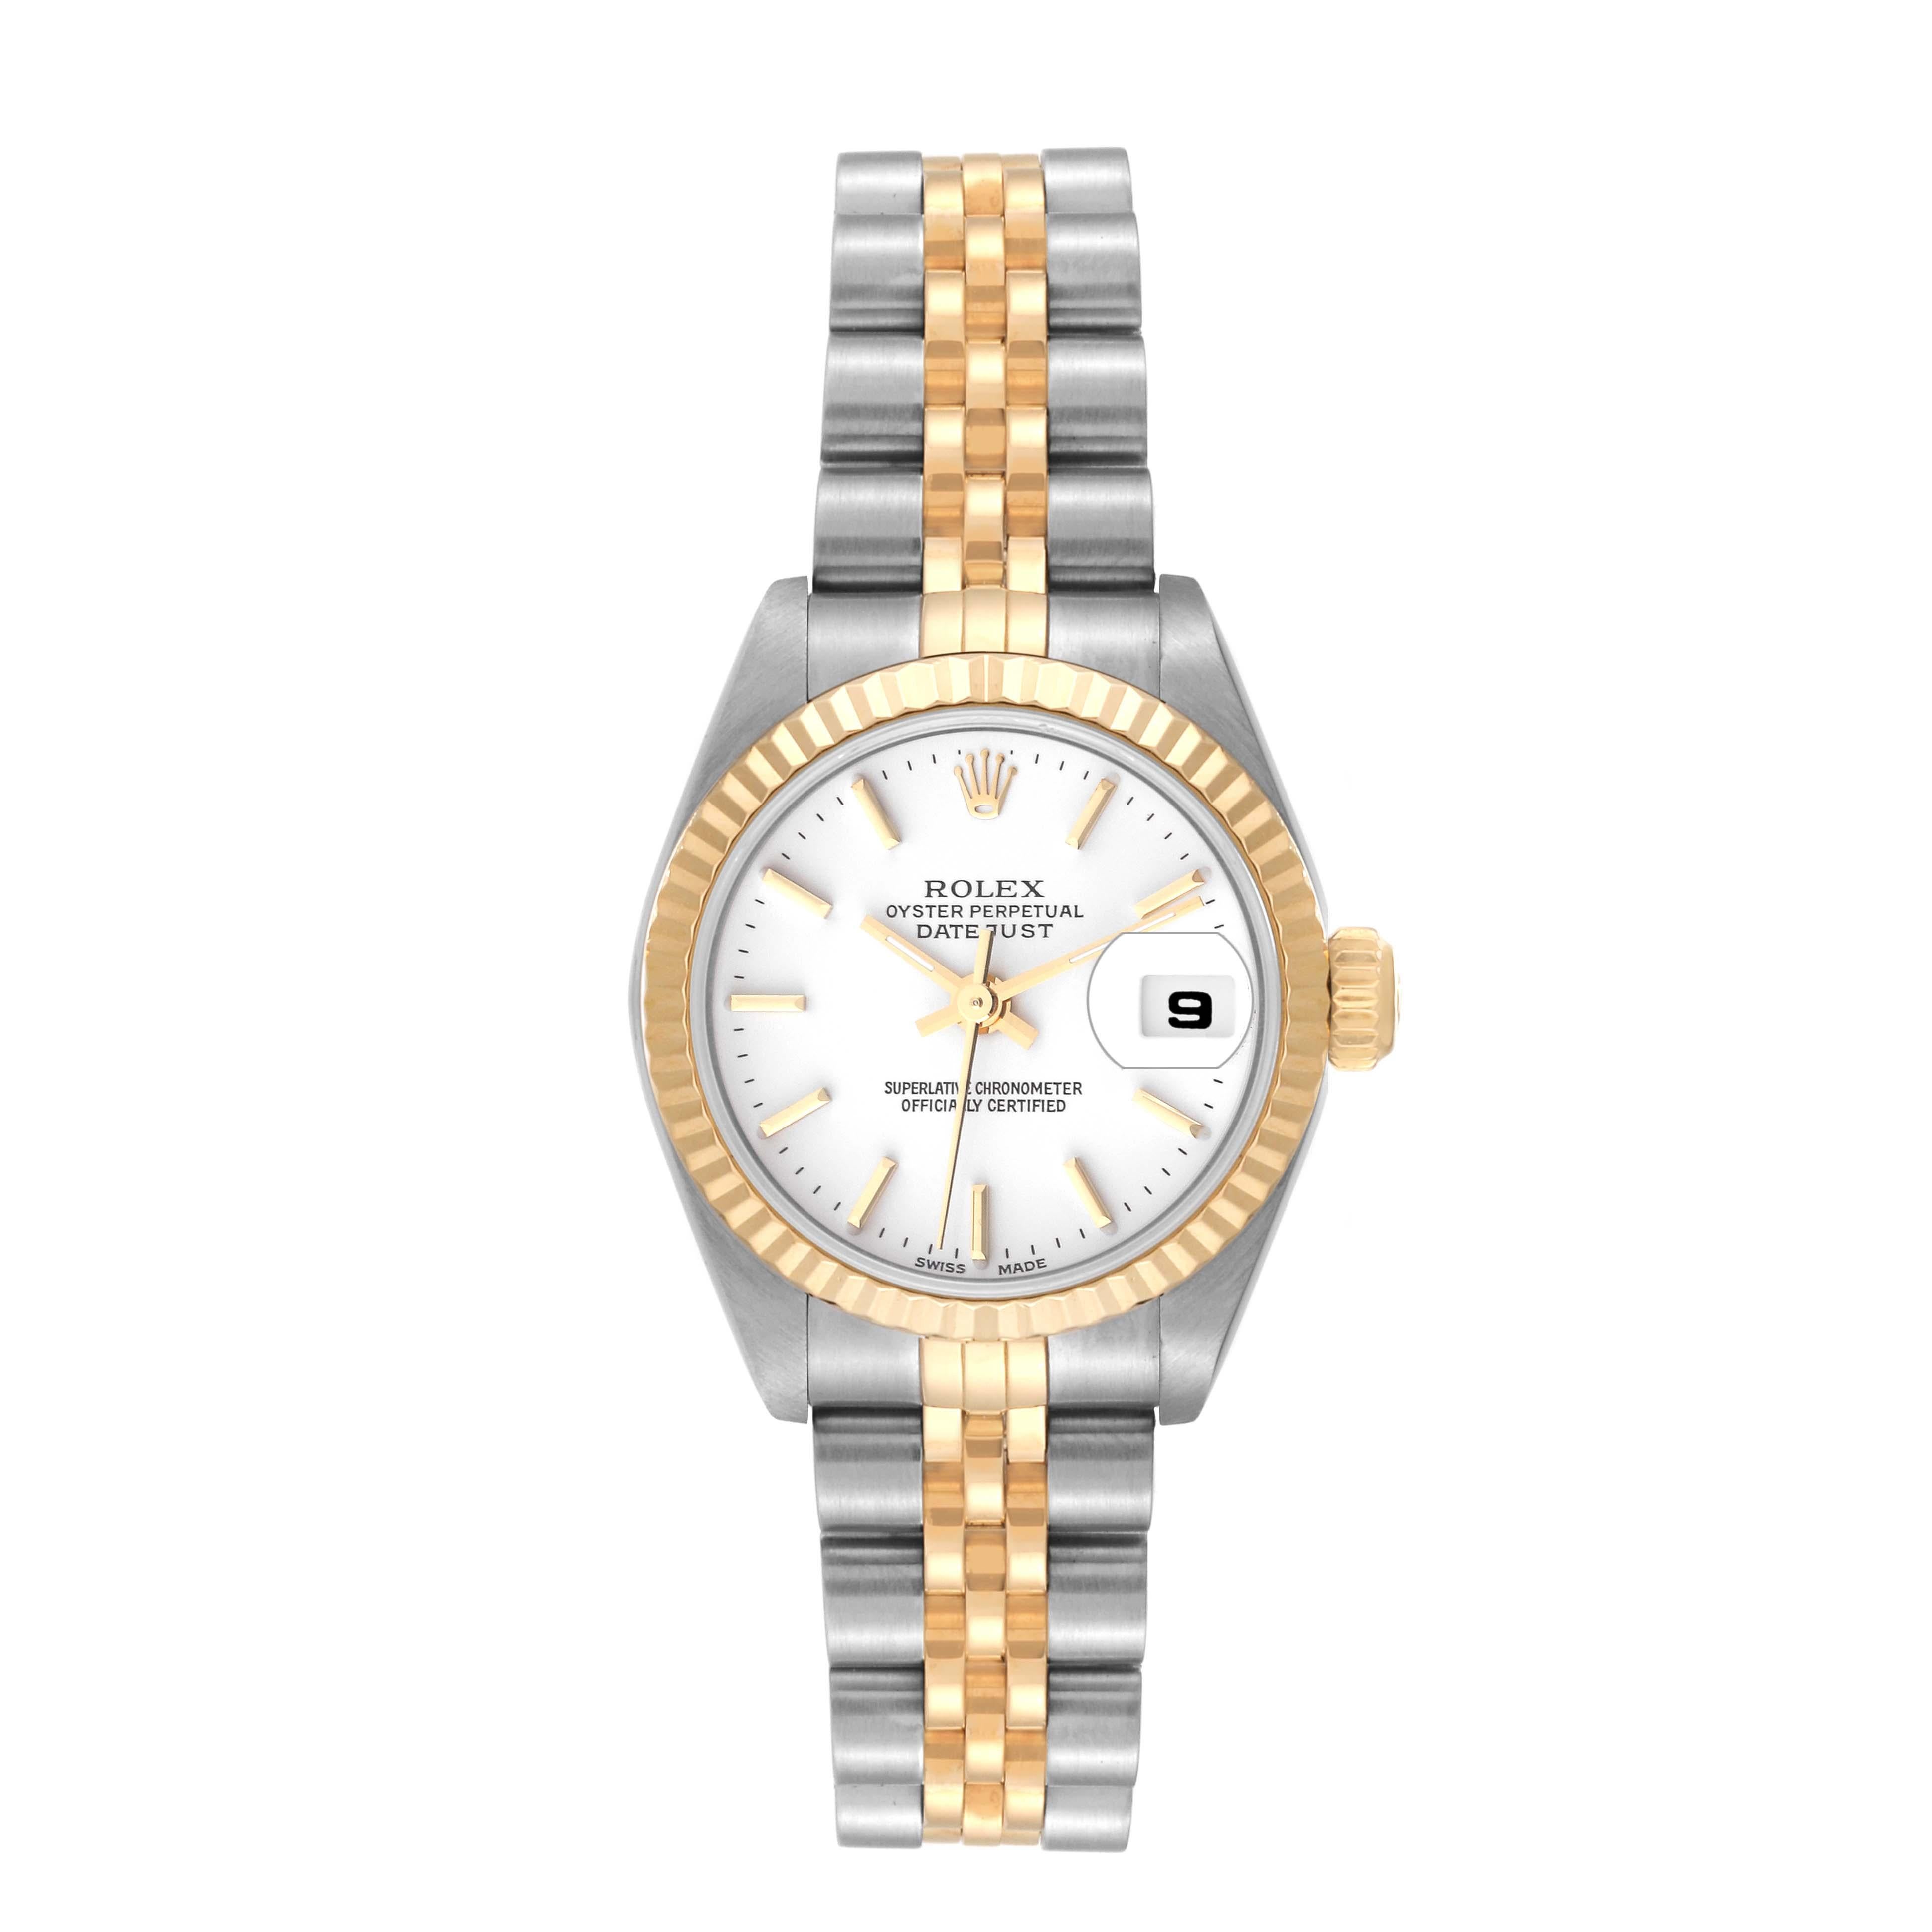 Rolex Datejust Steel Yellow Gold White Dial Ladies Watch 79173. Officially certified chronometer automatic self-winding movement. Stainless steel oyster case 26.0 mm in diameter. Rolex logo on an 18K yellow gold crown. 18k yellow gold fluted bezel.